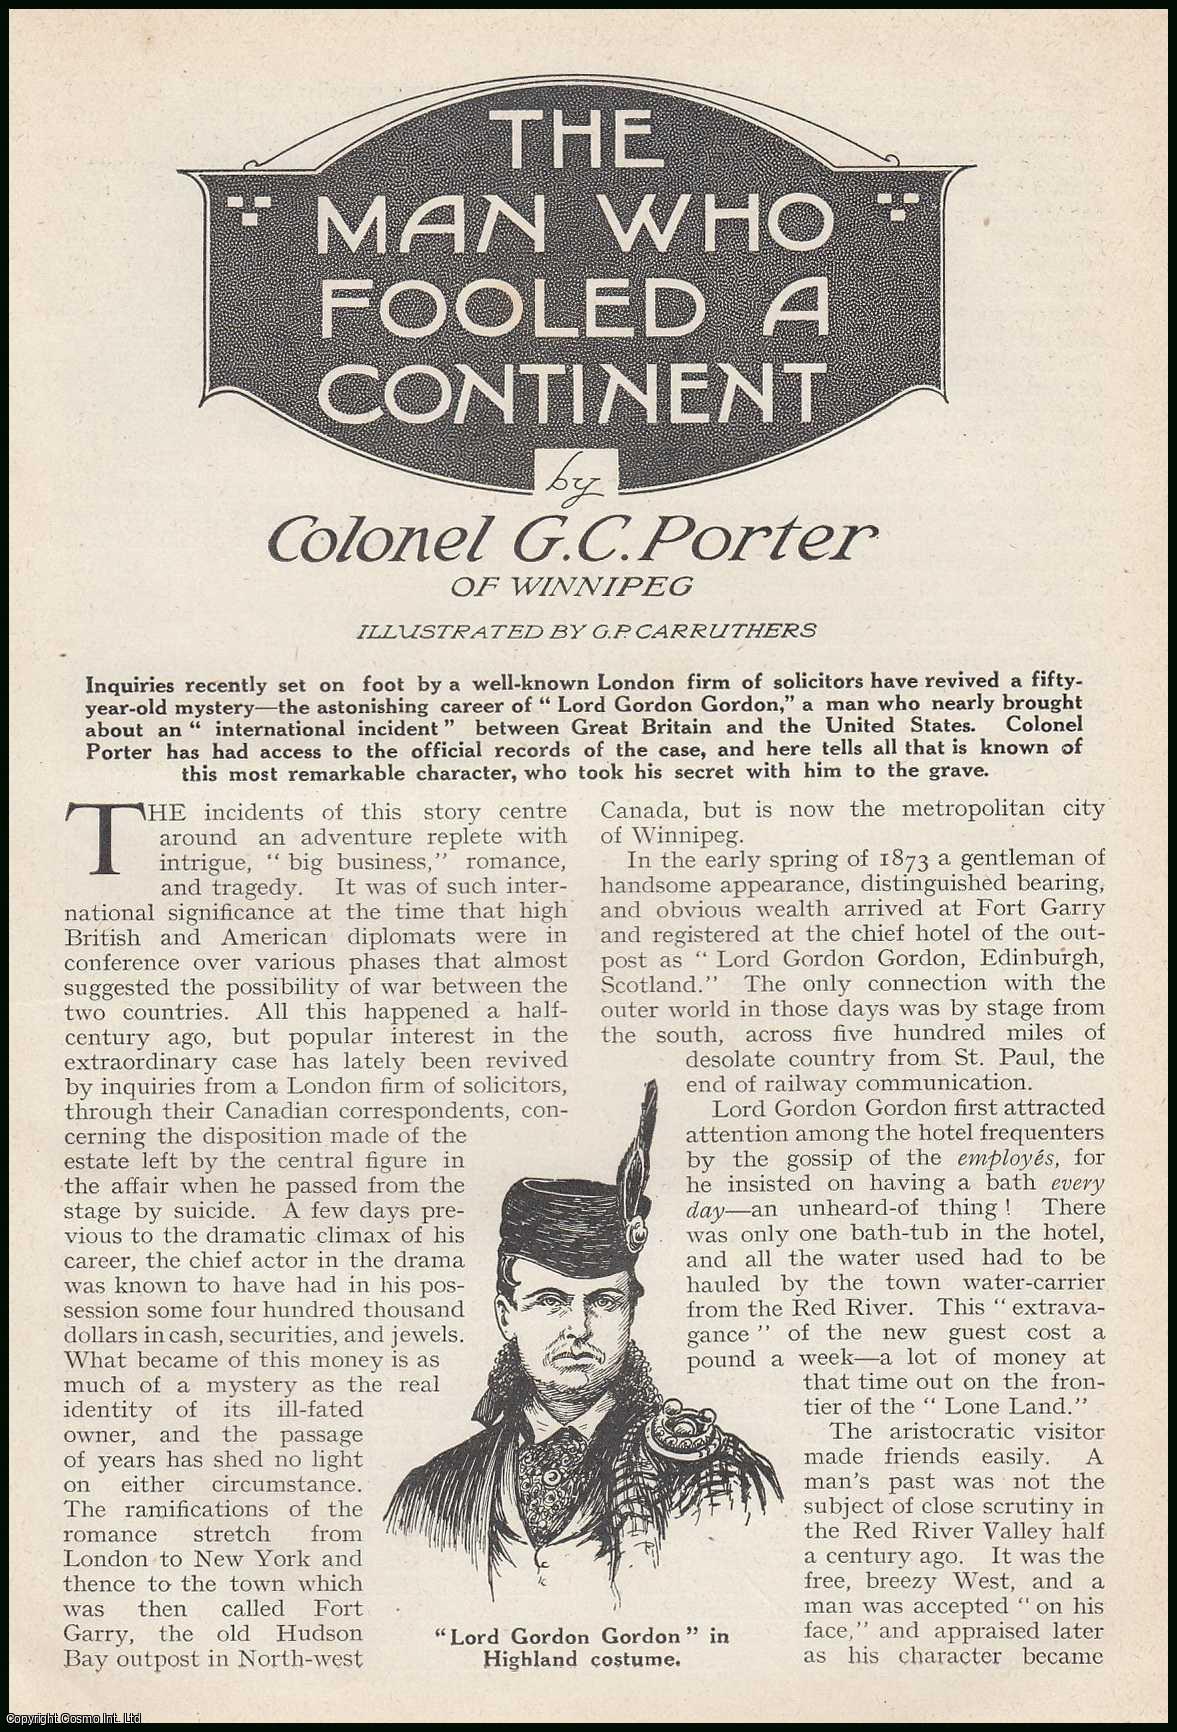 Colonel G.C. Porter of Winnipeg, illustrated by G.P. Carruthers. - Lord Gordon Gordon : The Man Who Fooled A Continent. The astonishing career of Lord Gordon Gordon. This is an uncommon original article from the Wide World Magazine, 1922.